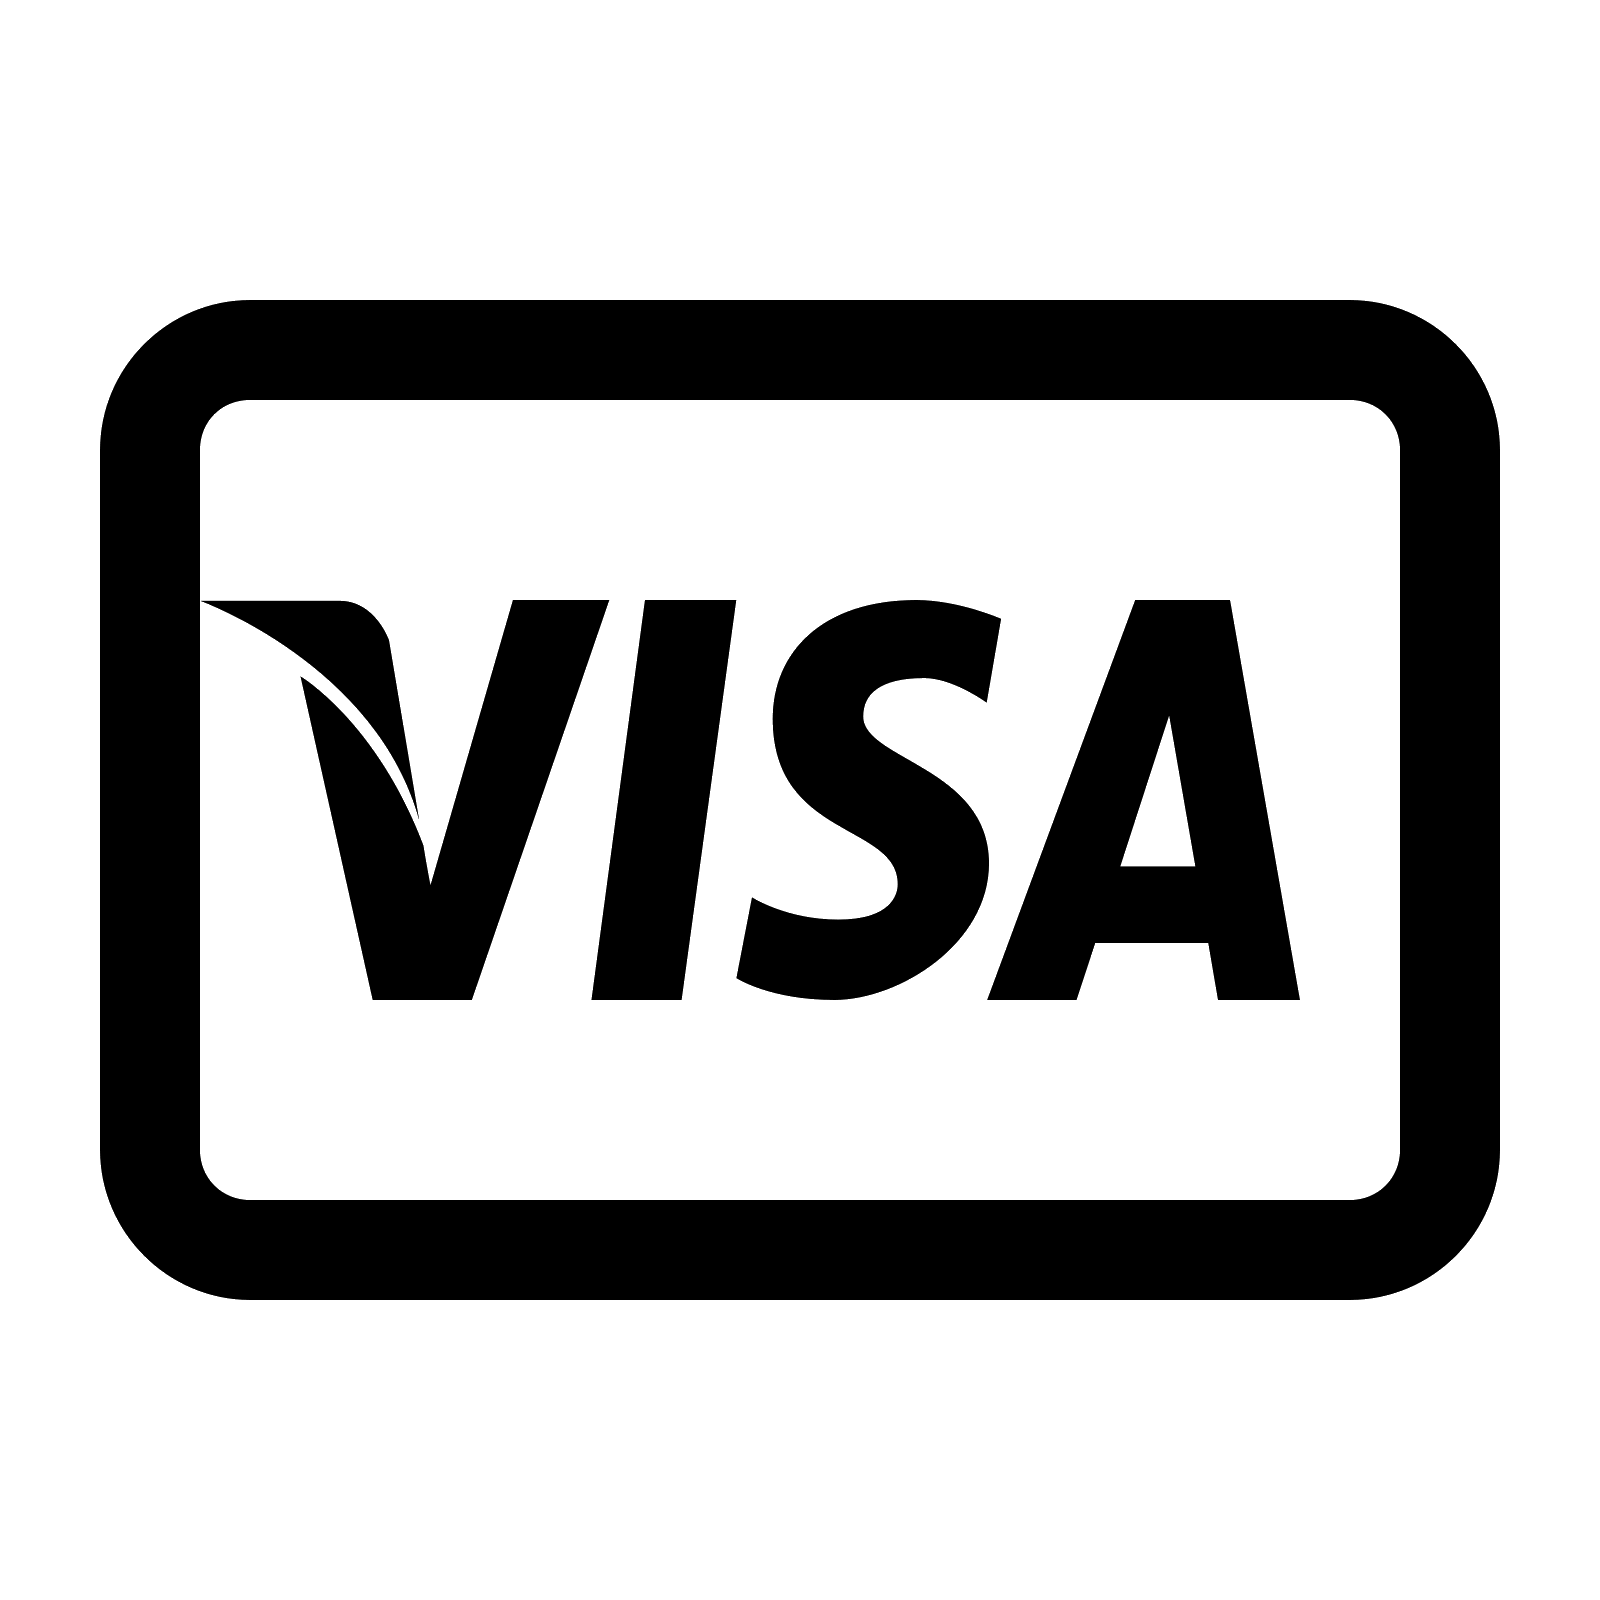 Small Picture of Visa Logo - Visa Icon download, PNG and vector